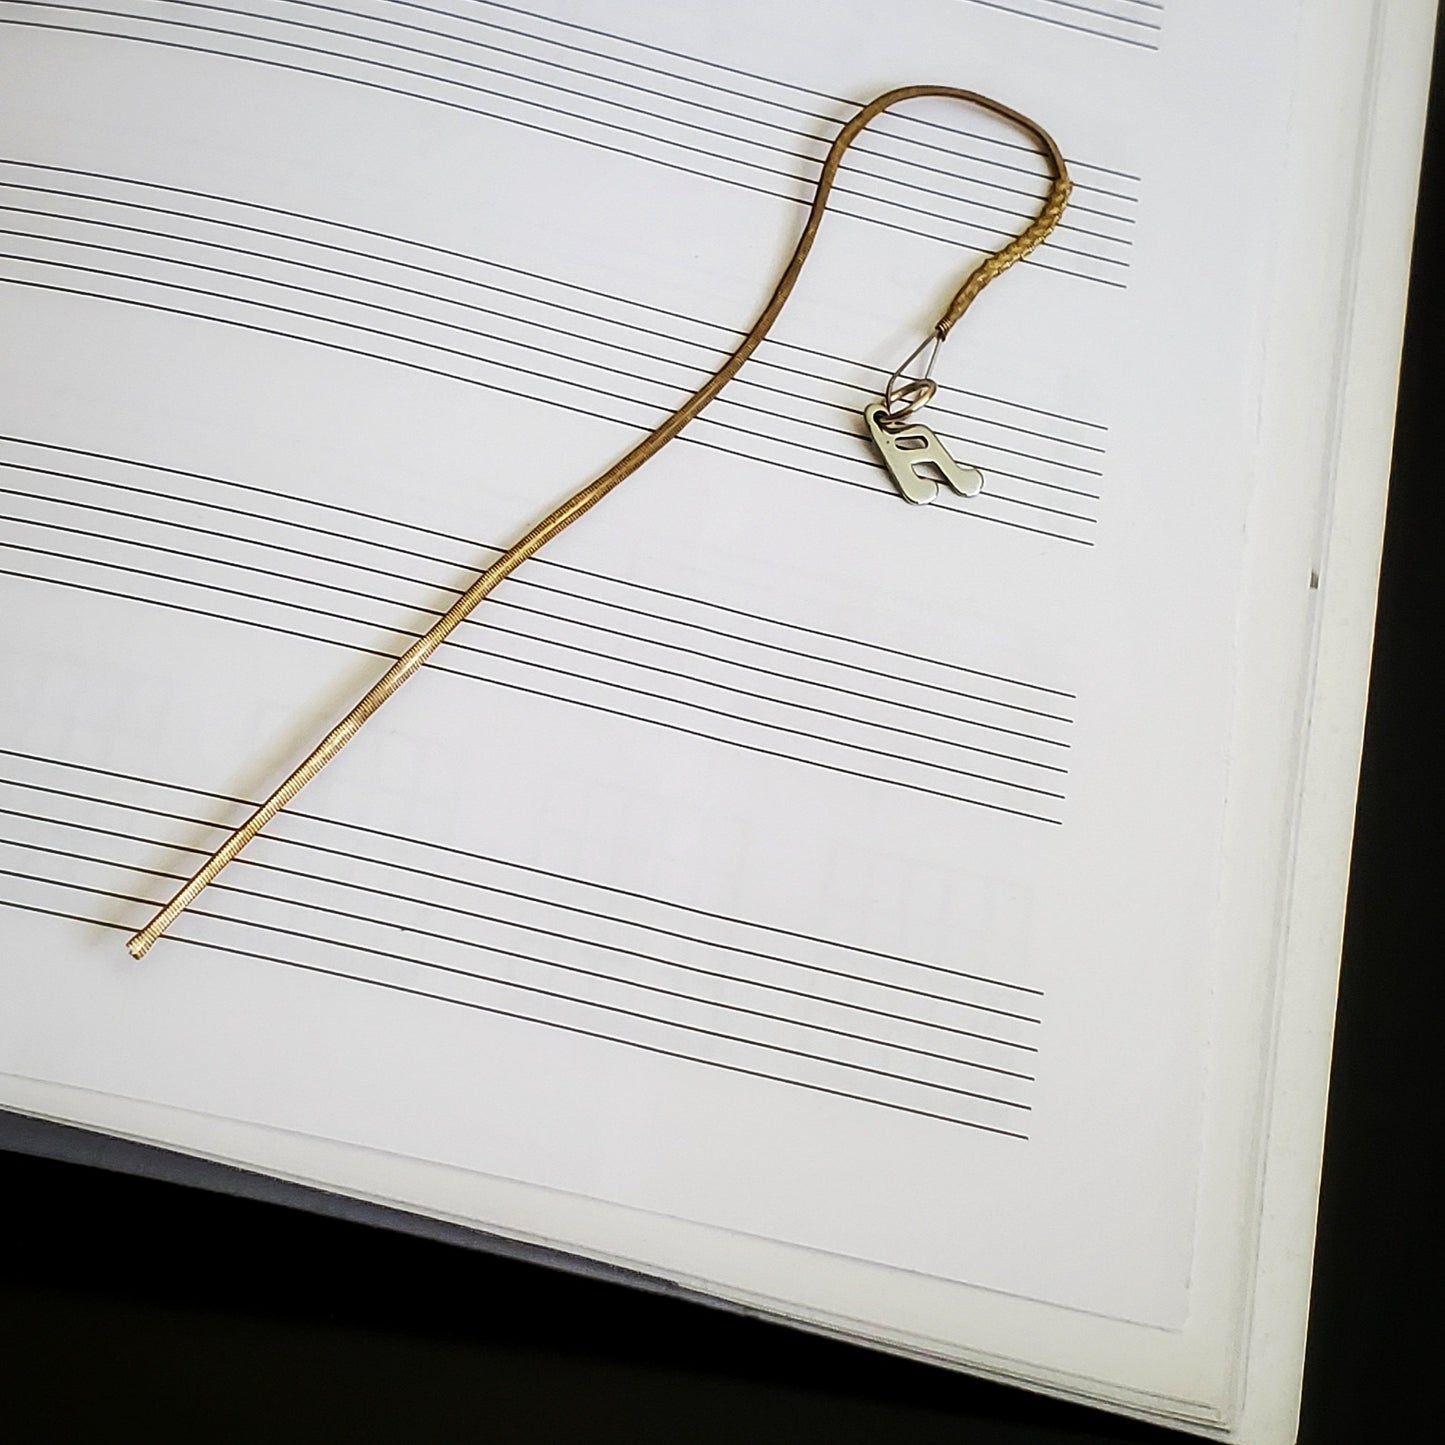 hook style bookmark made from an upcycled mandolin string and a silver quarter note shaped charm sitting on a blank page of sheet music